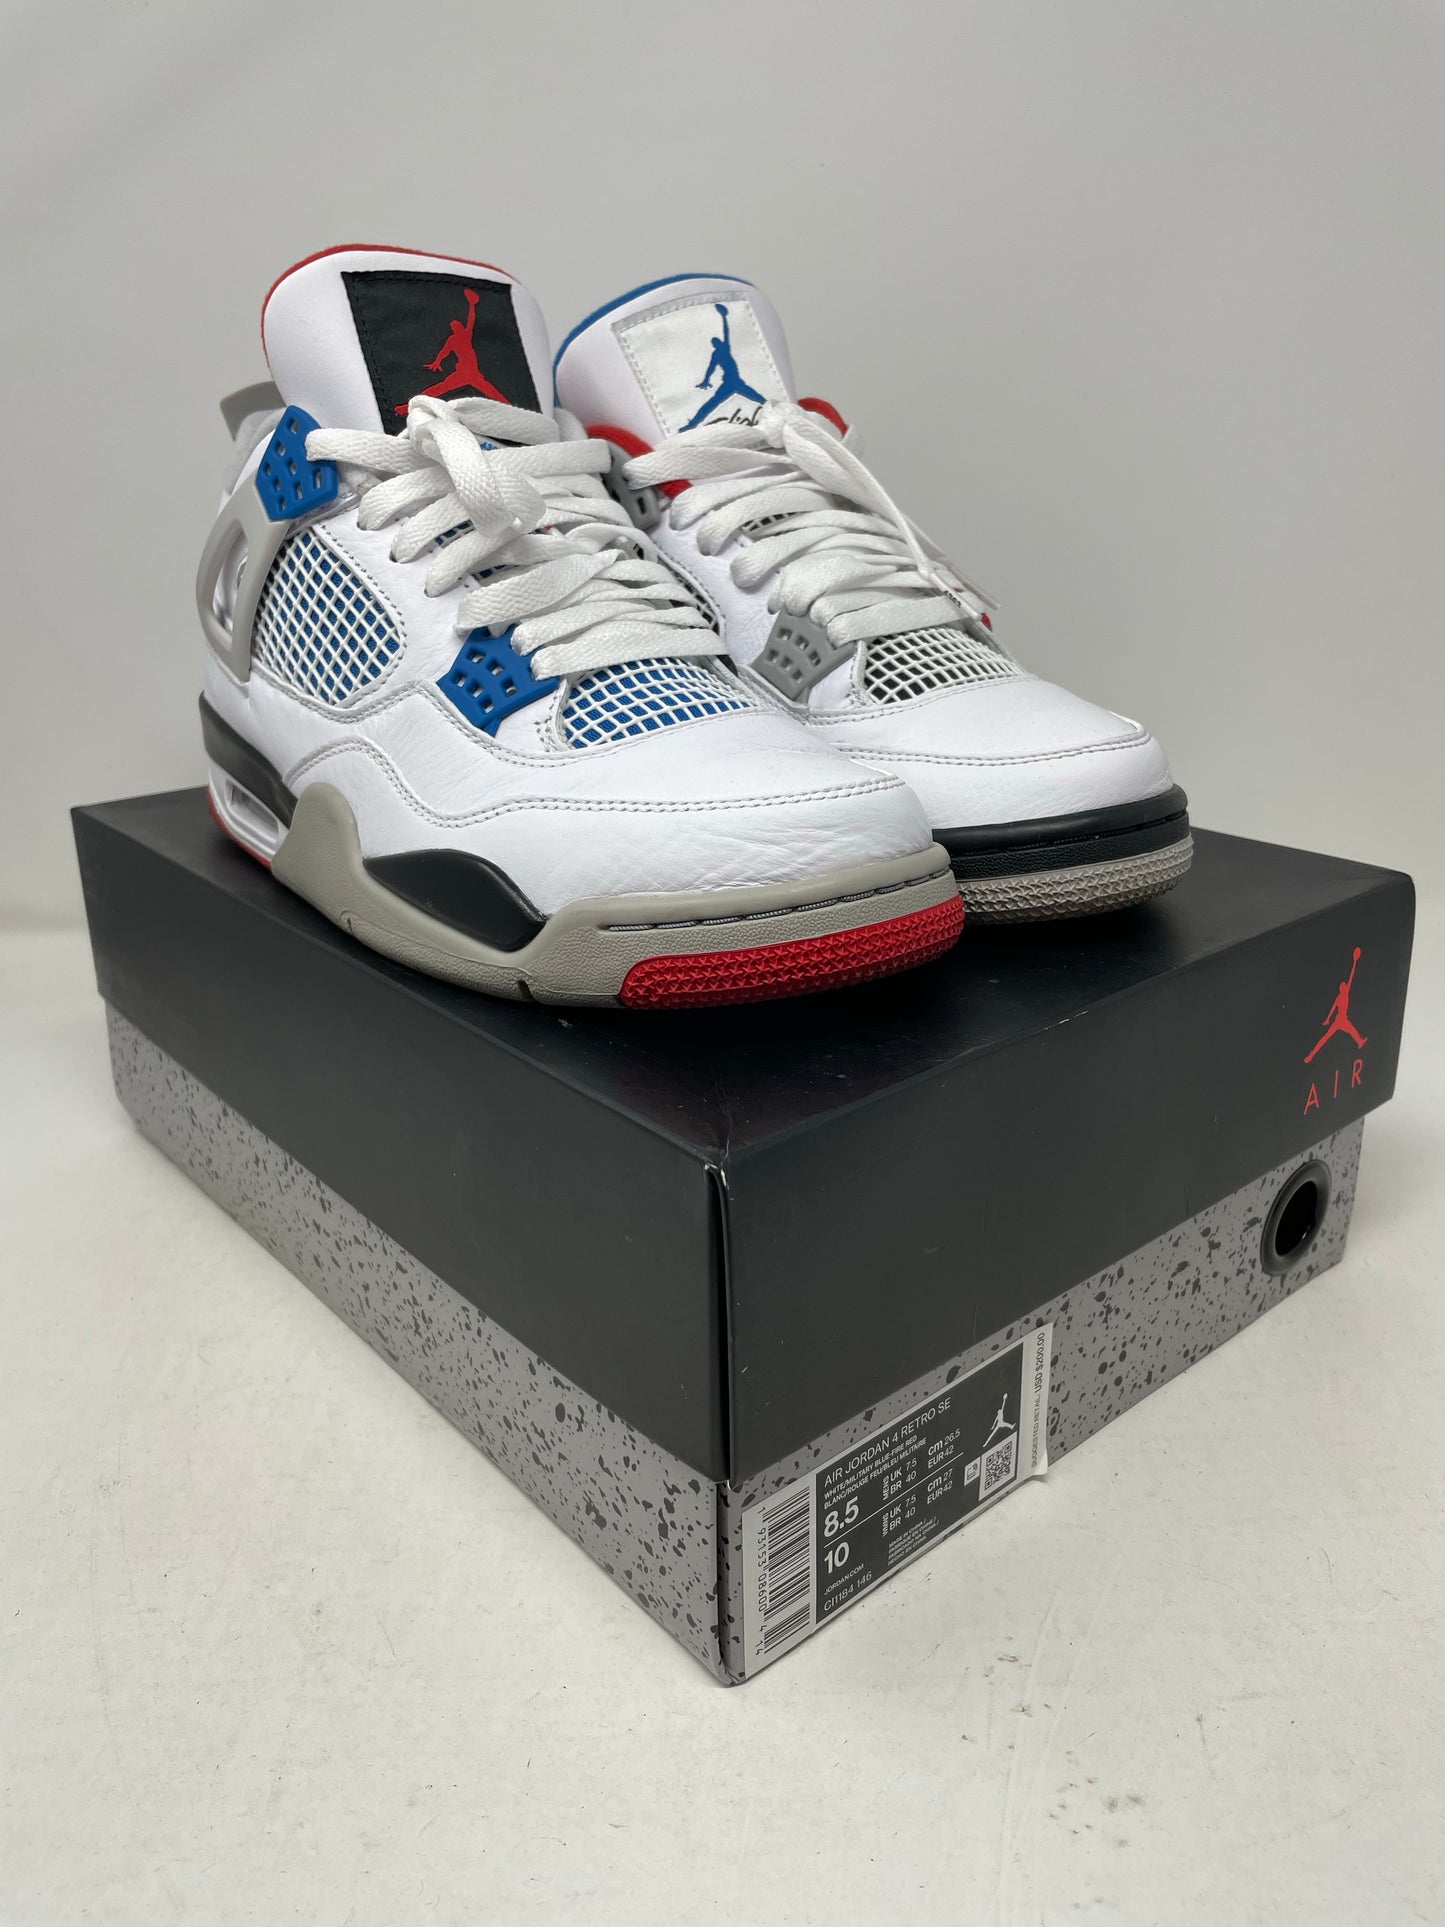 Load image into Gallery viewer, Jordan 4 Retro What The Sz 8.5
